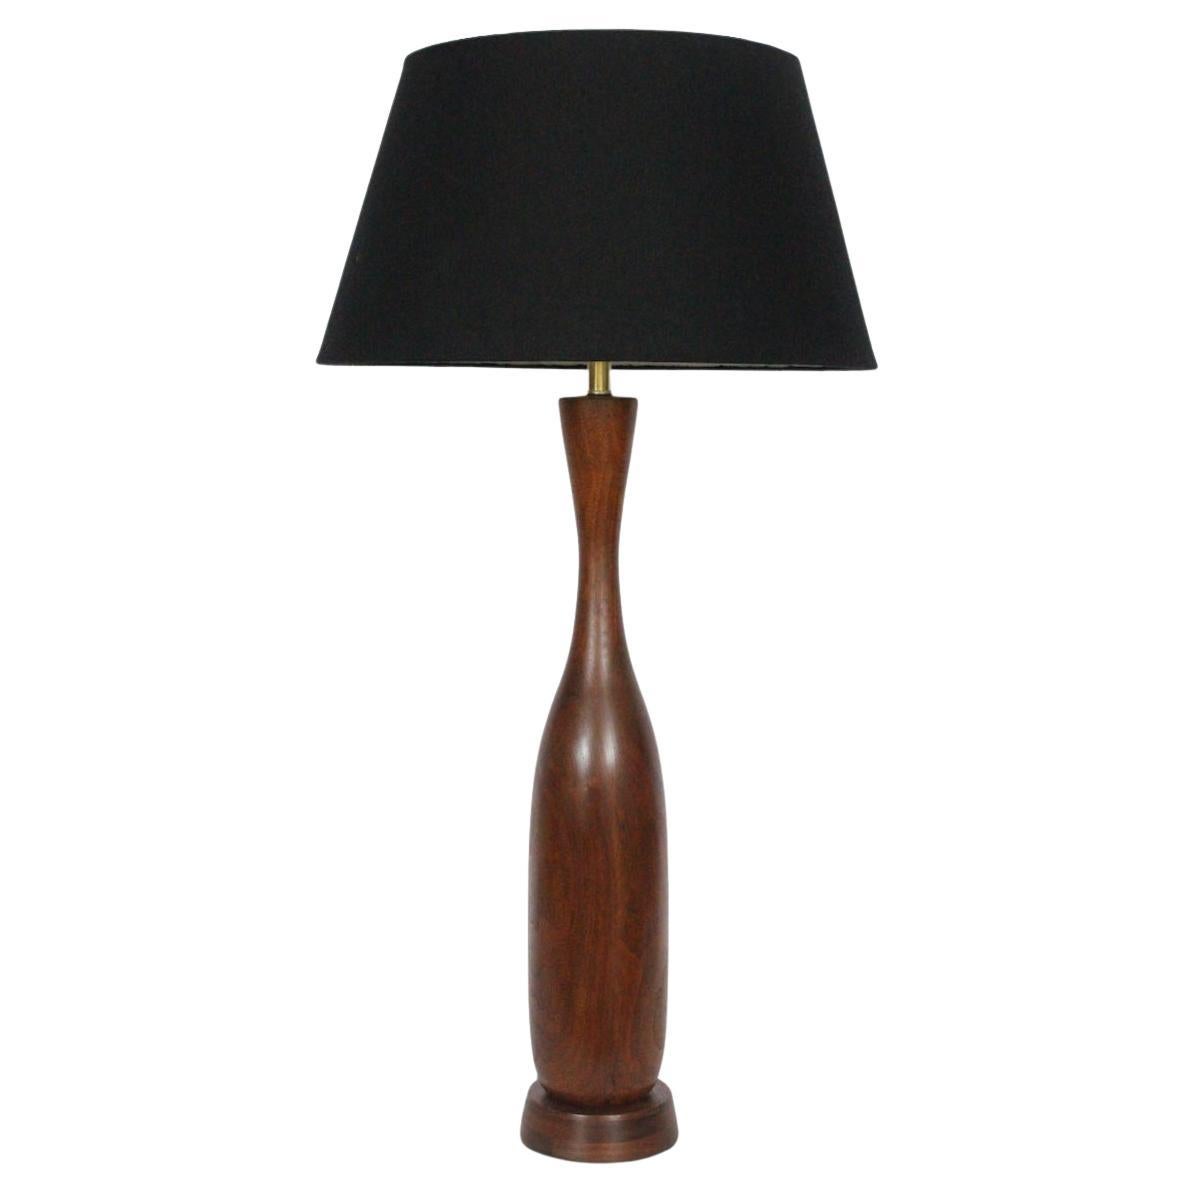 Substantial New Hope School Solid Walnut Table Lamp, circa 1960 For Sale